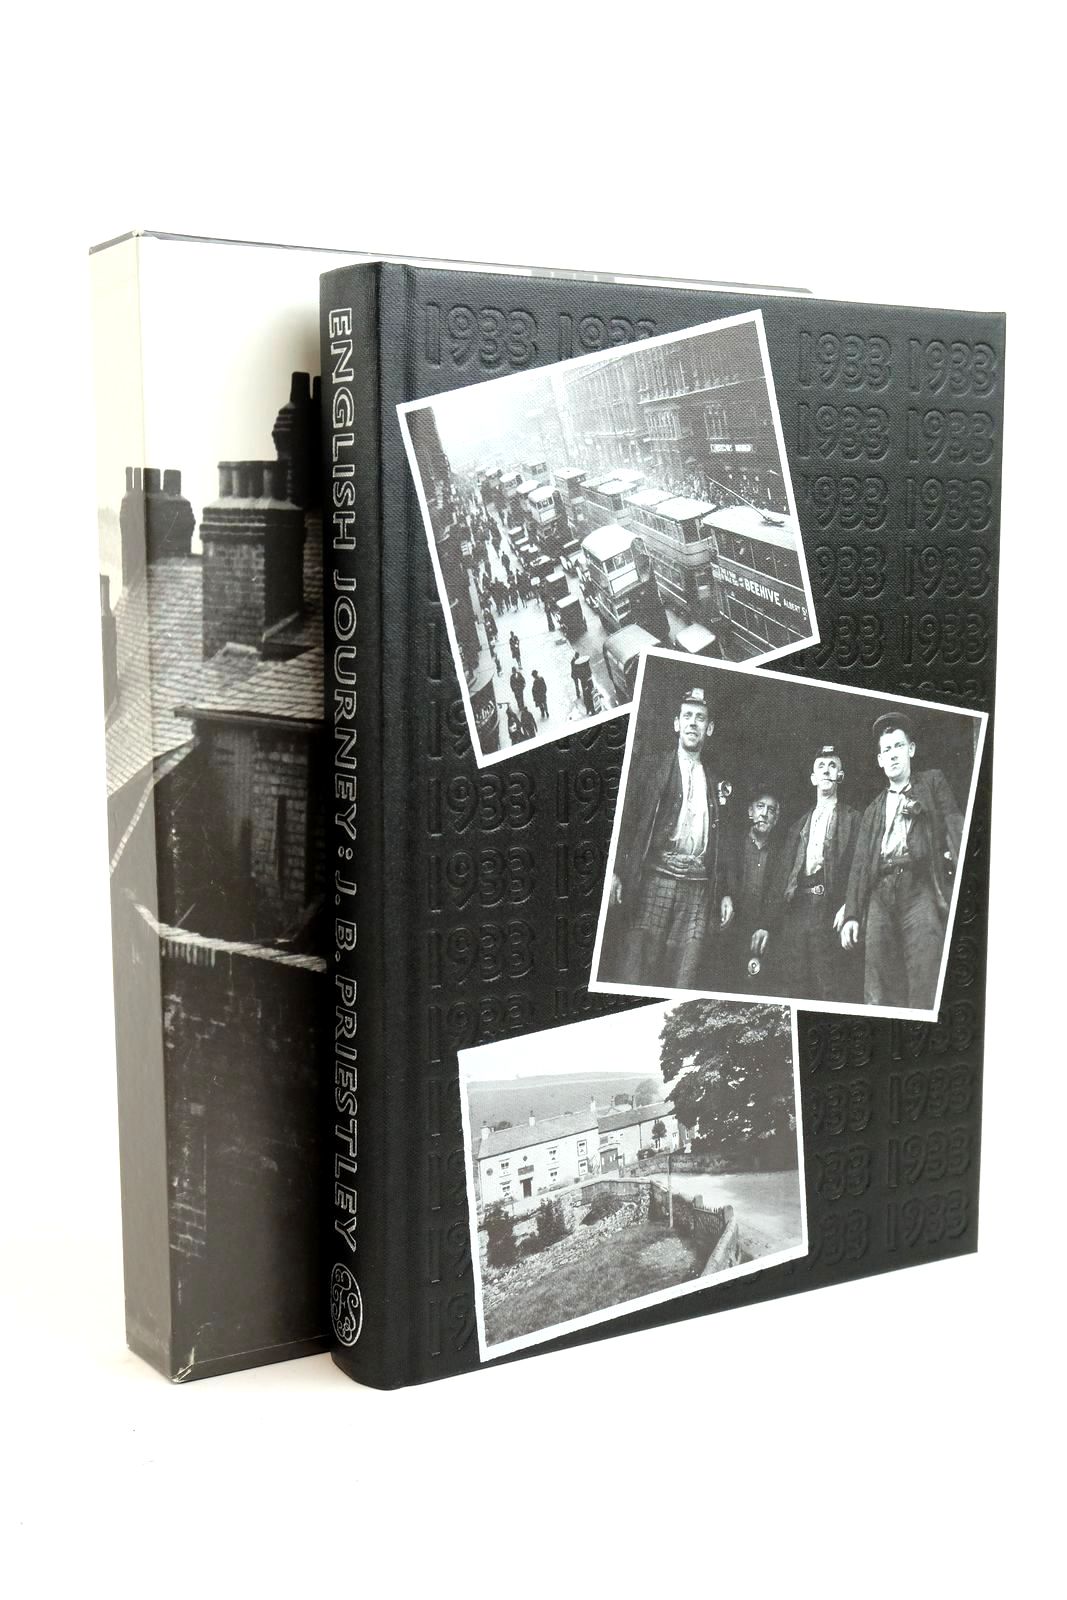 Photo of ENGLISH JOURNEY written by Priestley, J.B. published by Folio Society (STOCK CODE: 1321407)  for sale by Stella & Rose's Books